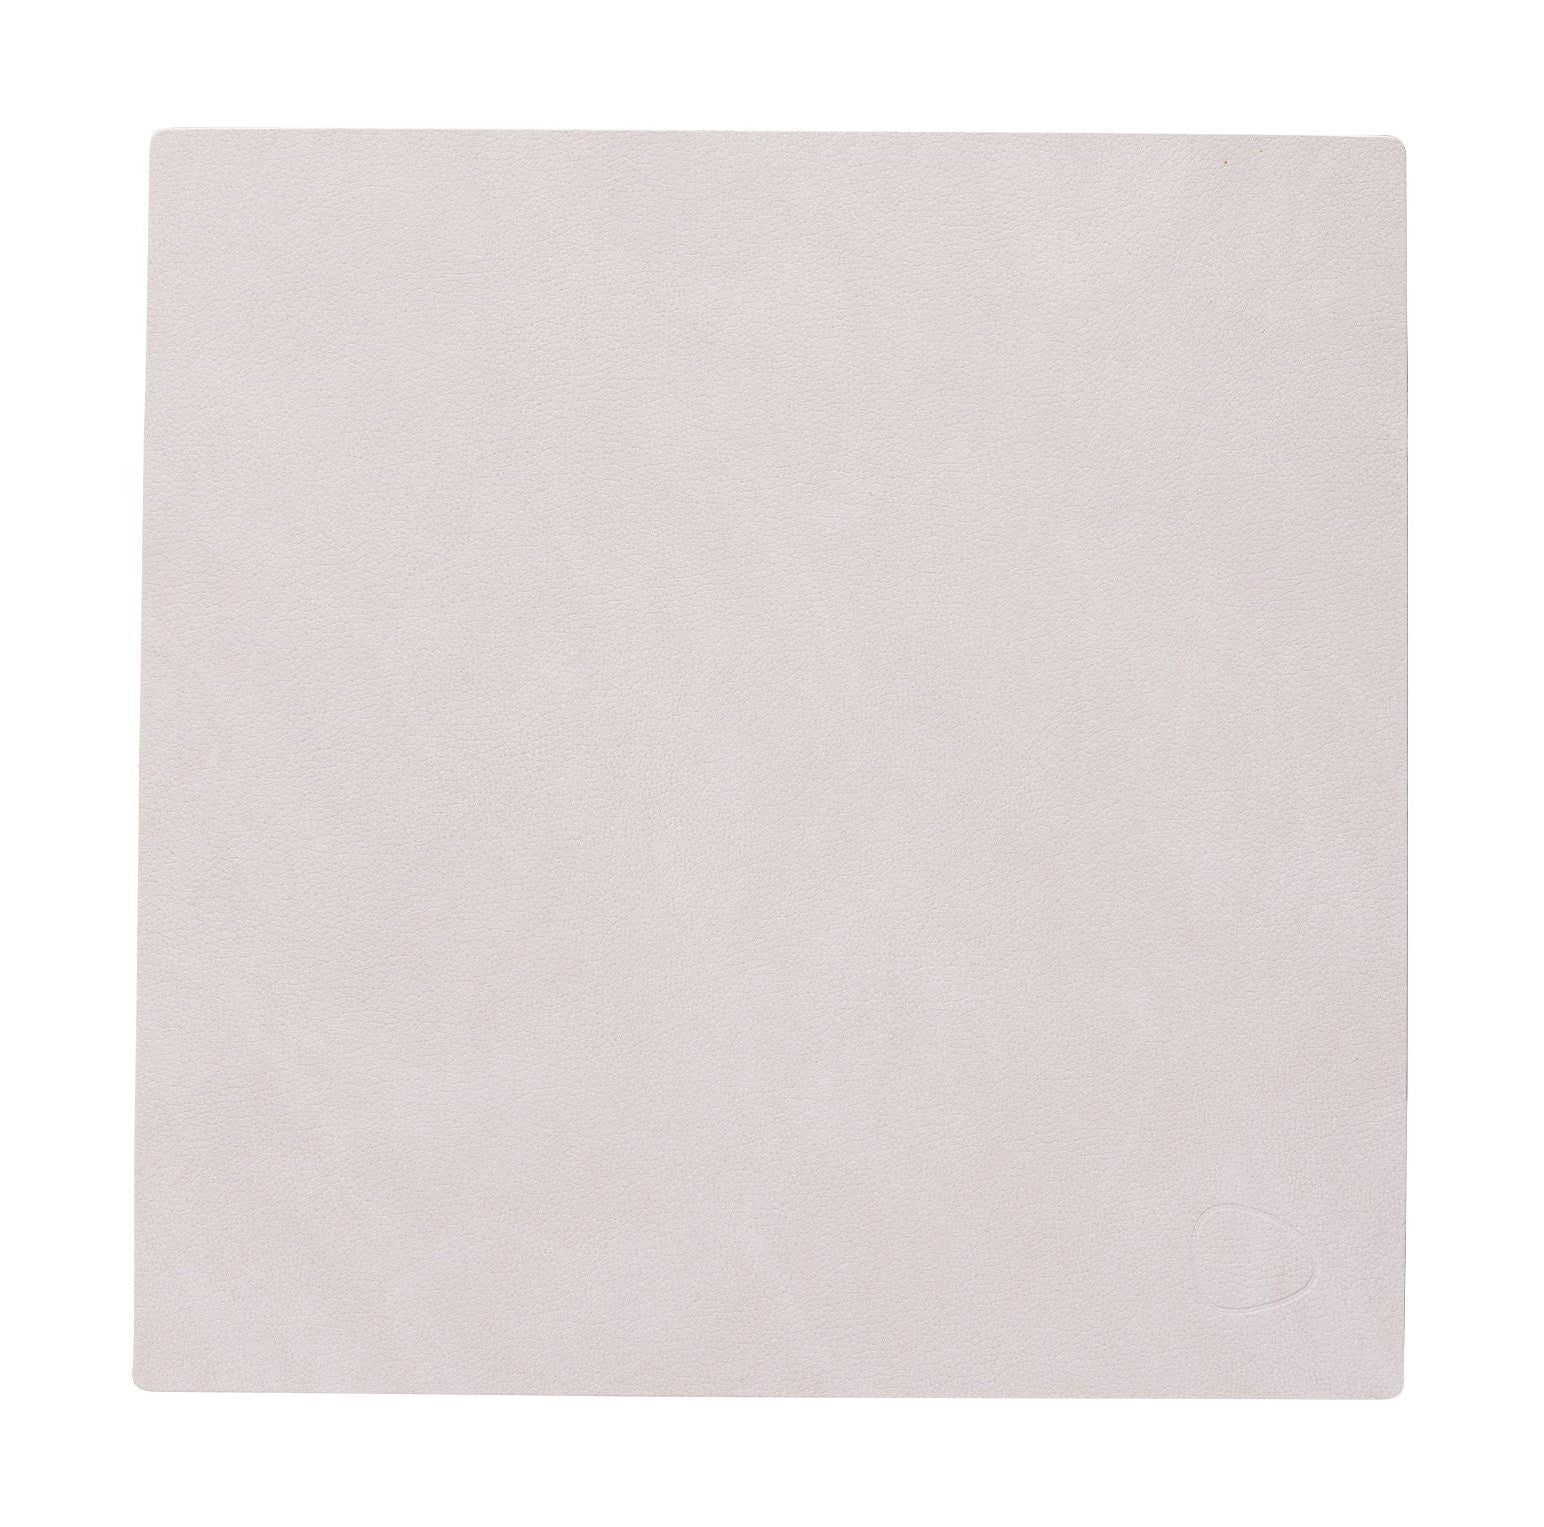 Lind DNA Bord MAT Square S, Oyster White